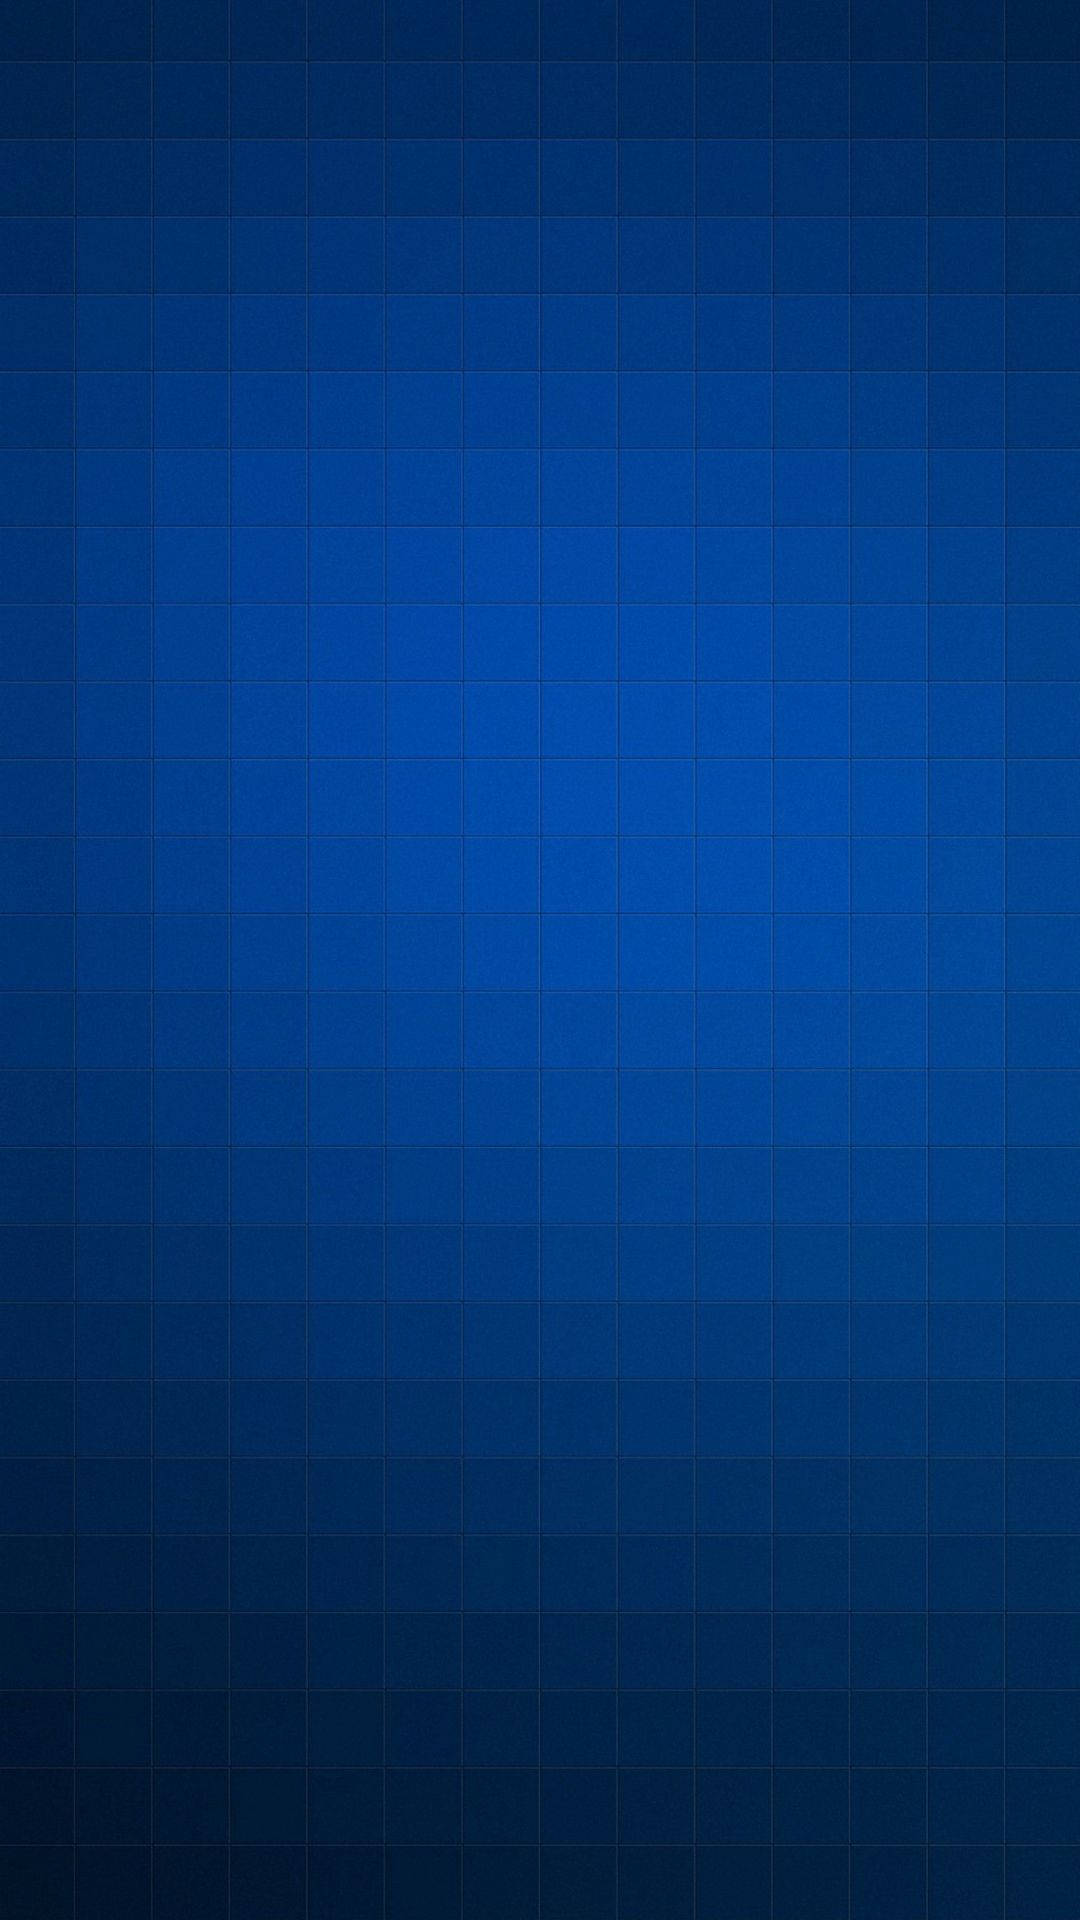 Top 999+ Blue Iphone Wallpaper Full HD, 4K Free to Use